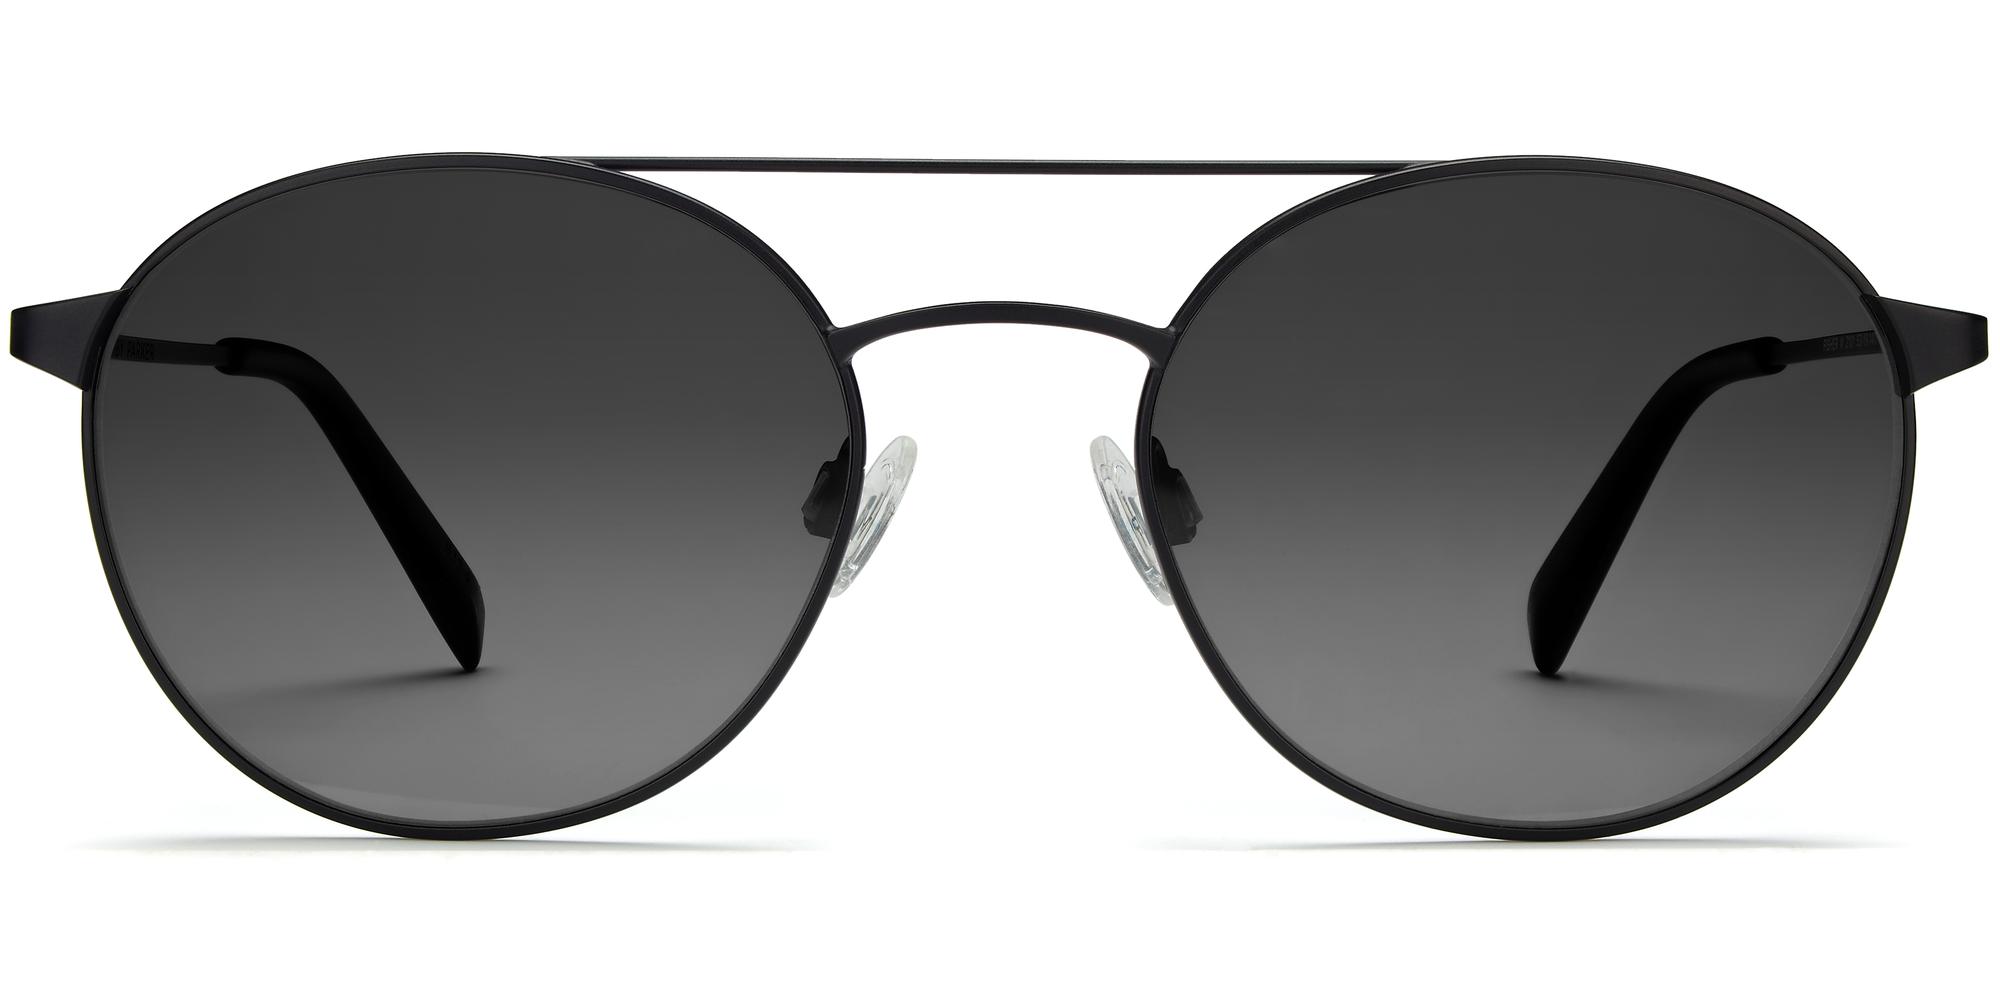 Fisher Wide m sunglasses in Brushed Ink (Grey Rx) | The Fashionisto